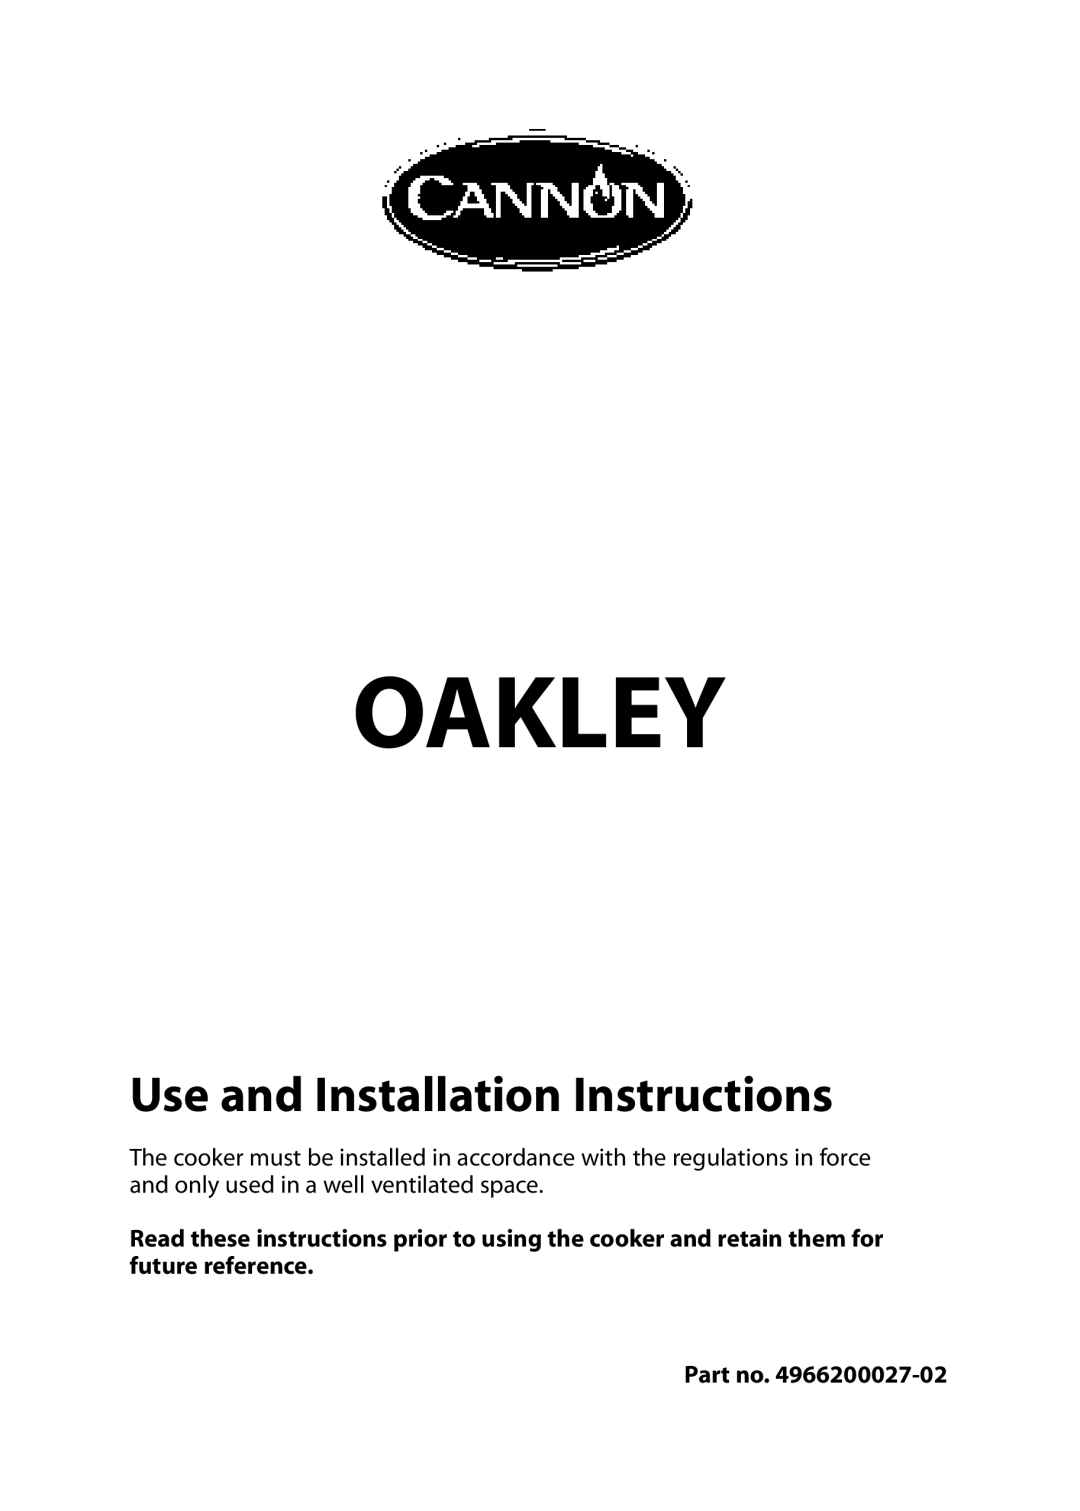 Cannon 10515G, 10512G, 10510G, 10518G installation instructions Oakley, Use and Installation Instructions 